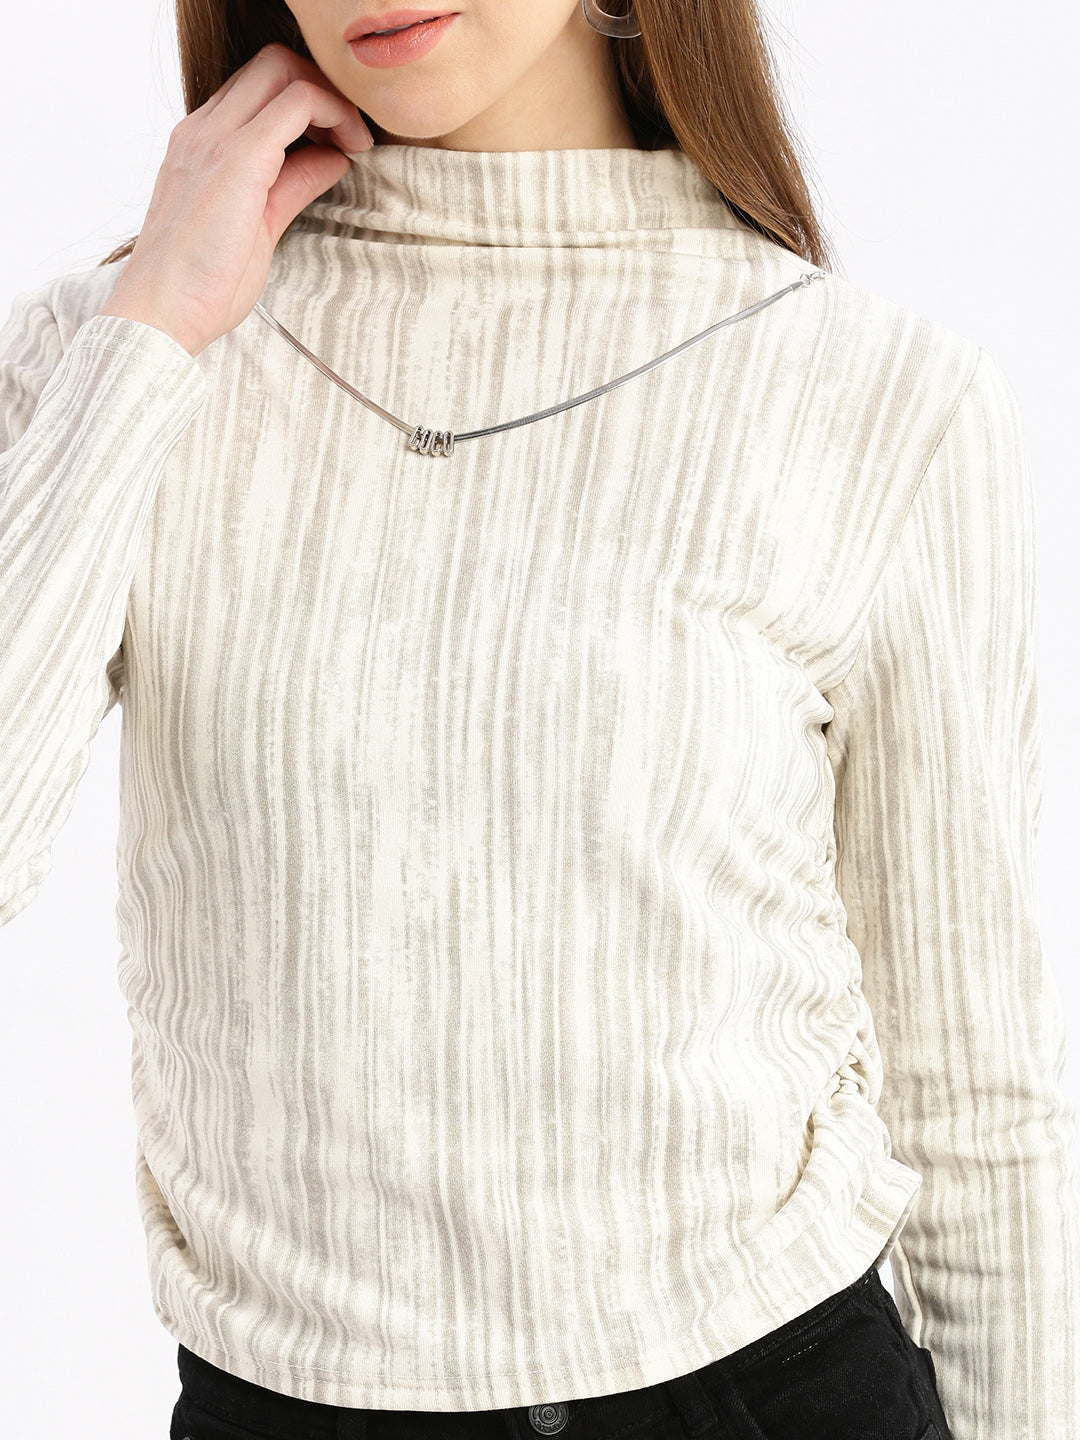 Women Striped Cream Fitted Top with Neck Chain